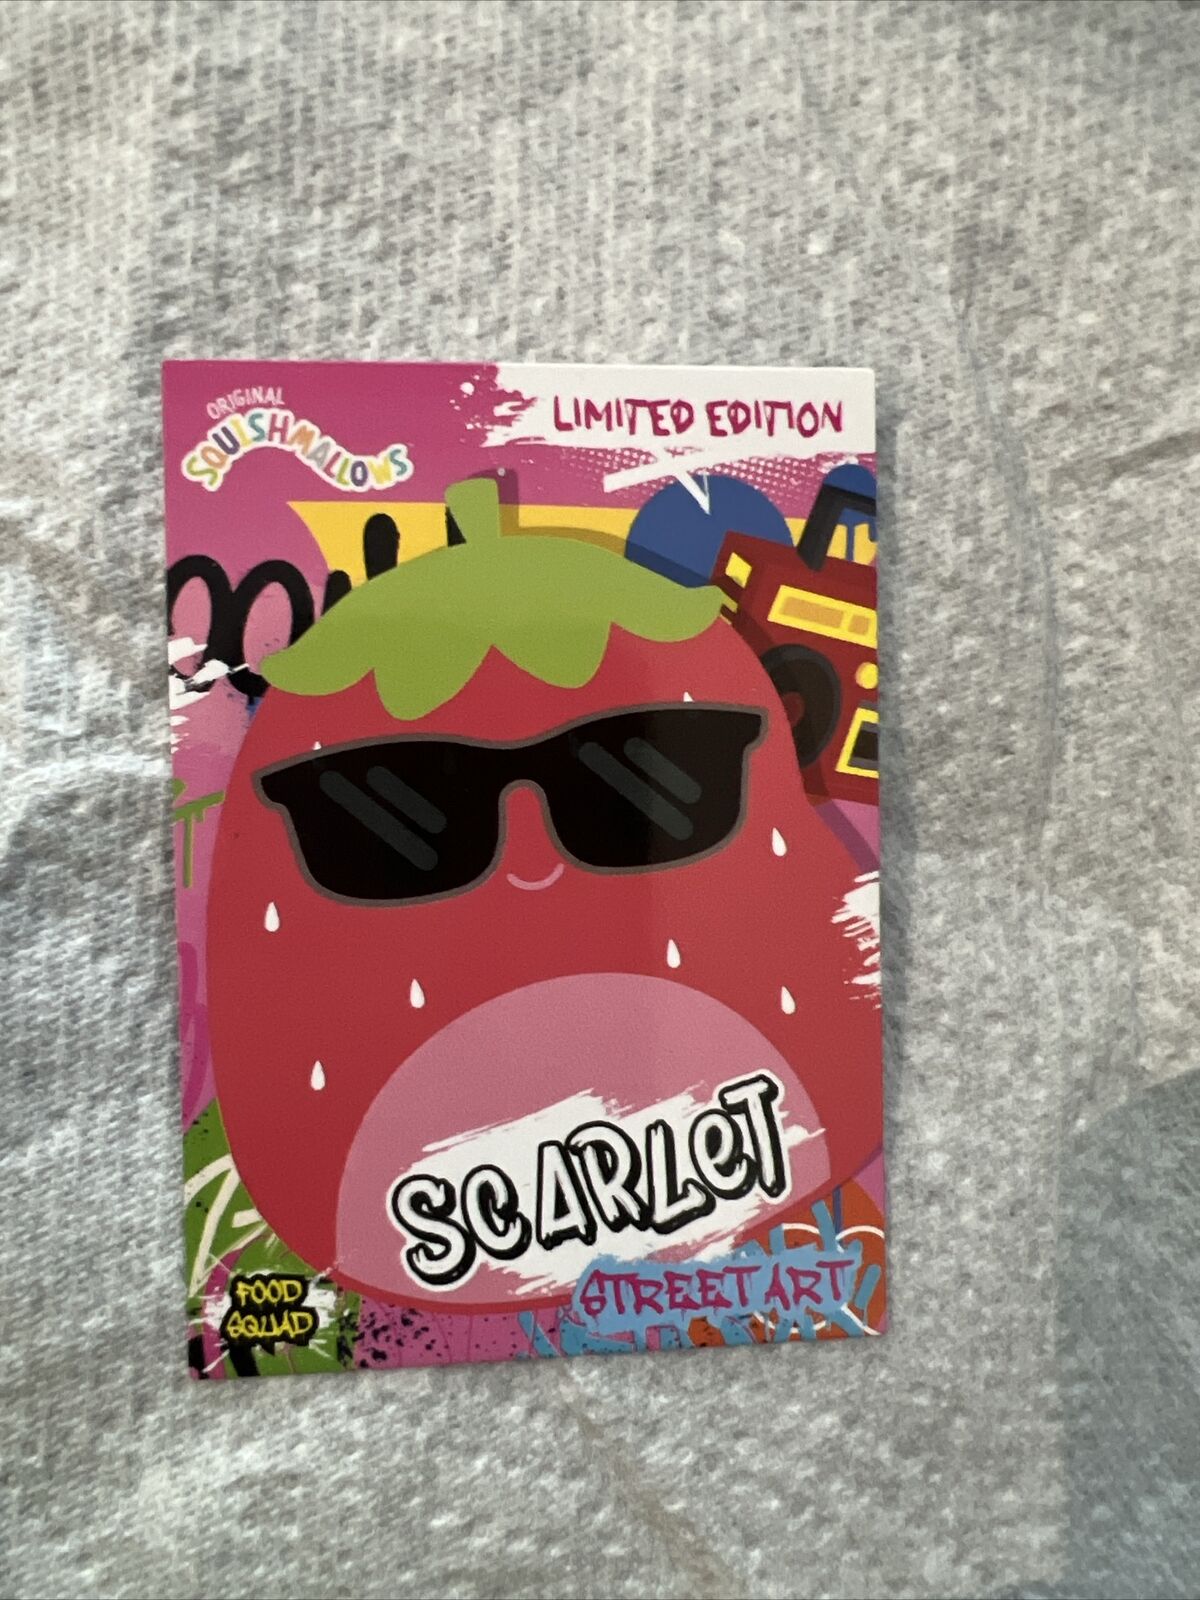 Squishmallows Limited Edition Trading Card. SCARLOT. STREET ART. NEW